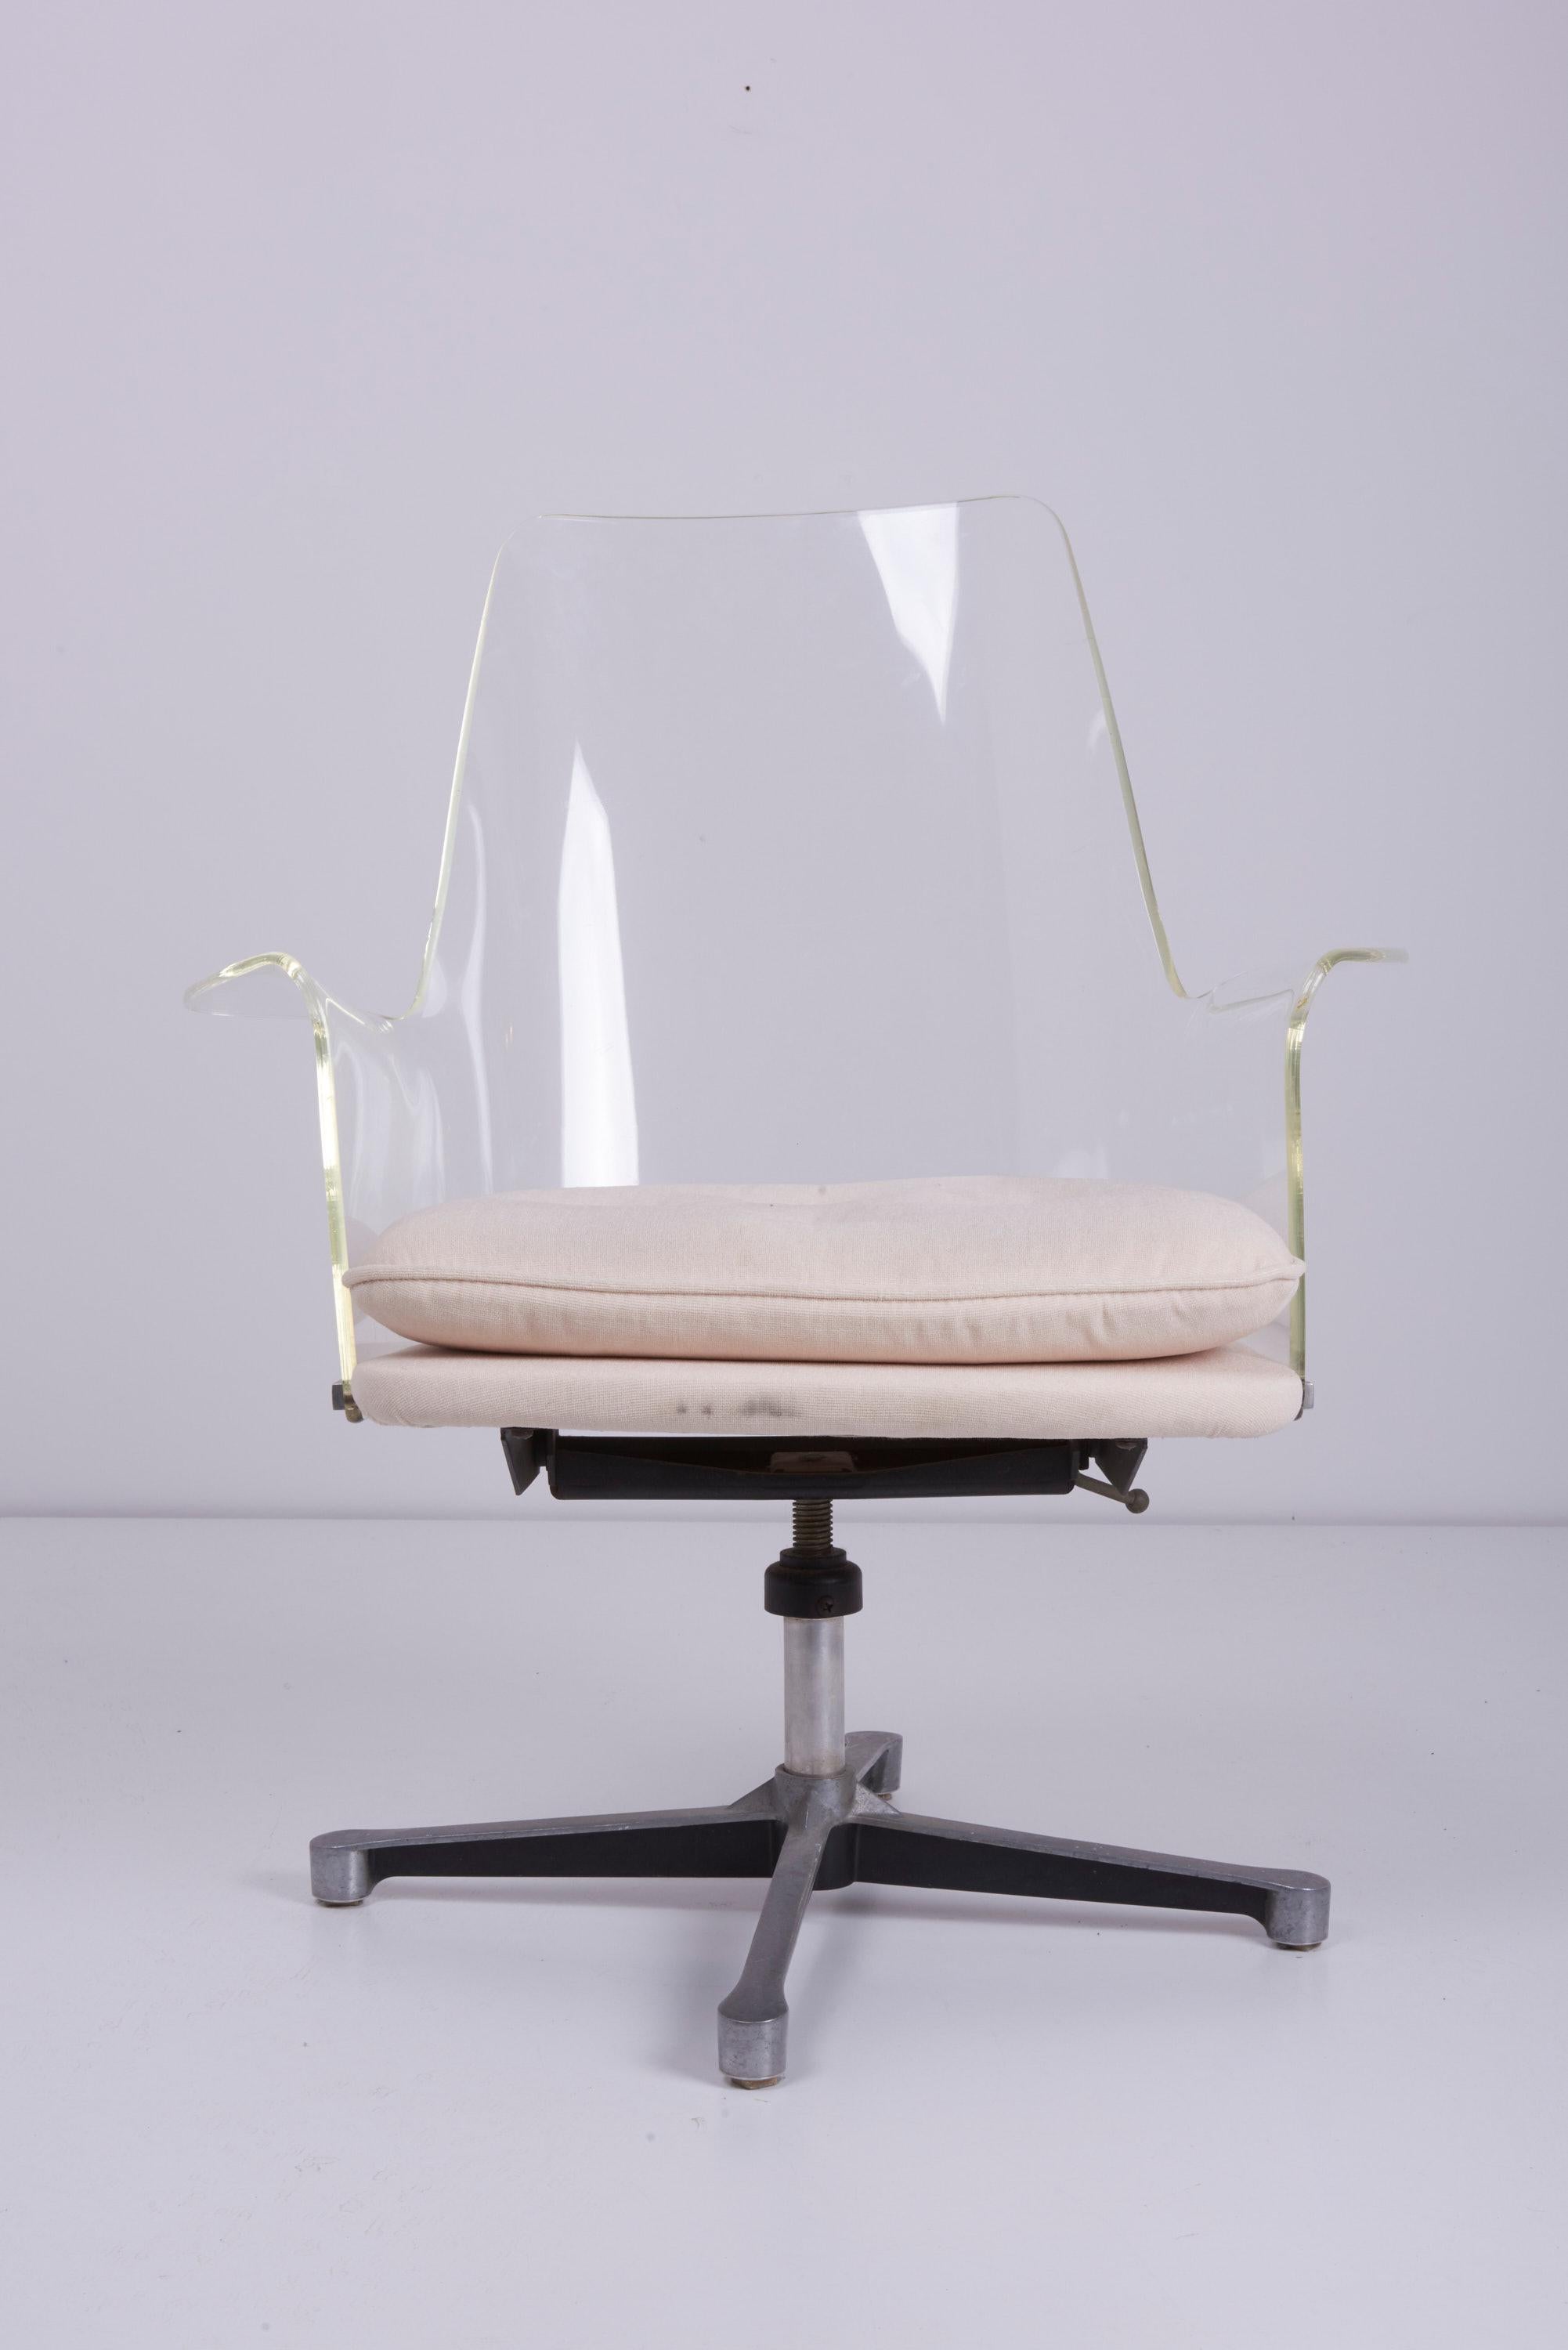 20th Century Pair of Swivel Chairs Made of Lucite in Manner of Laverne